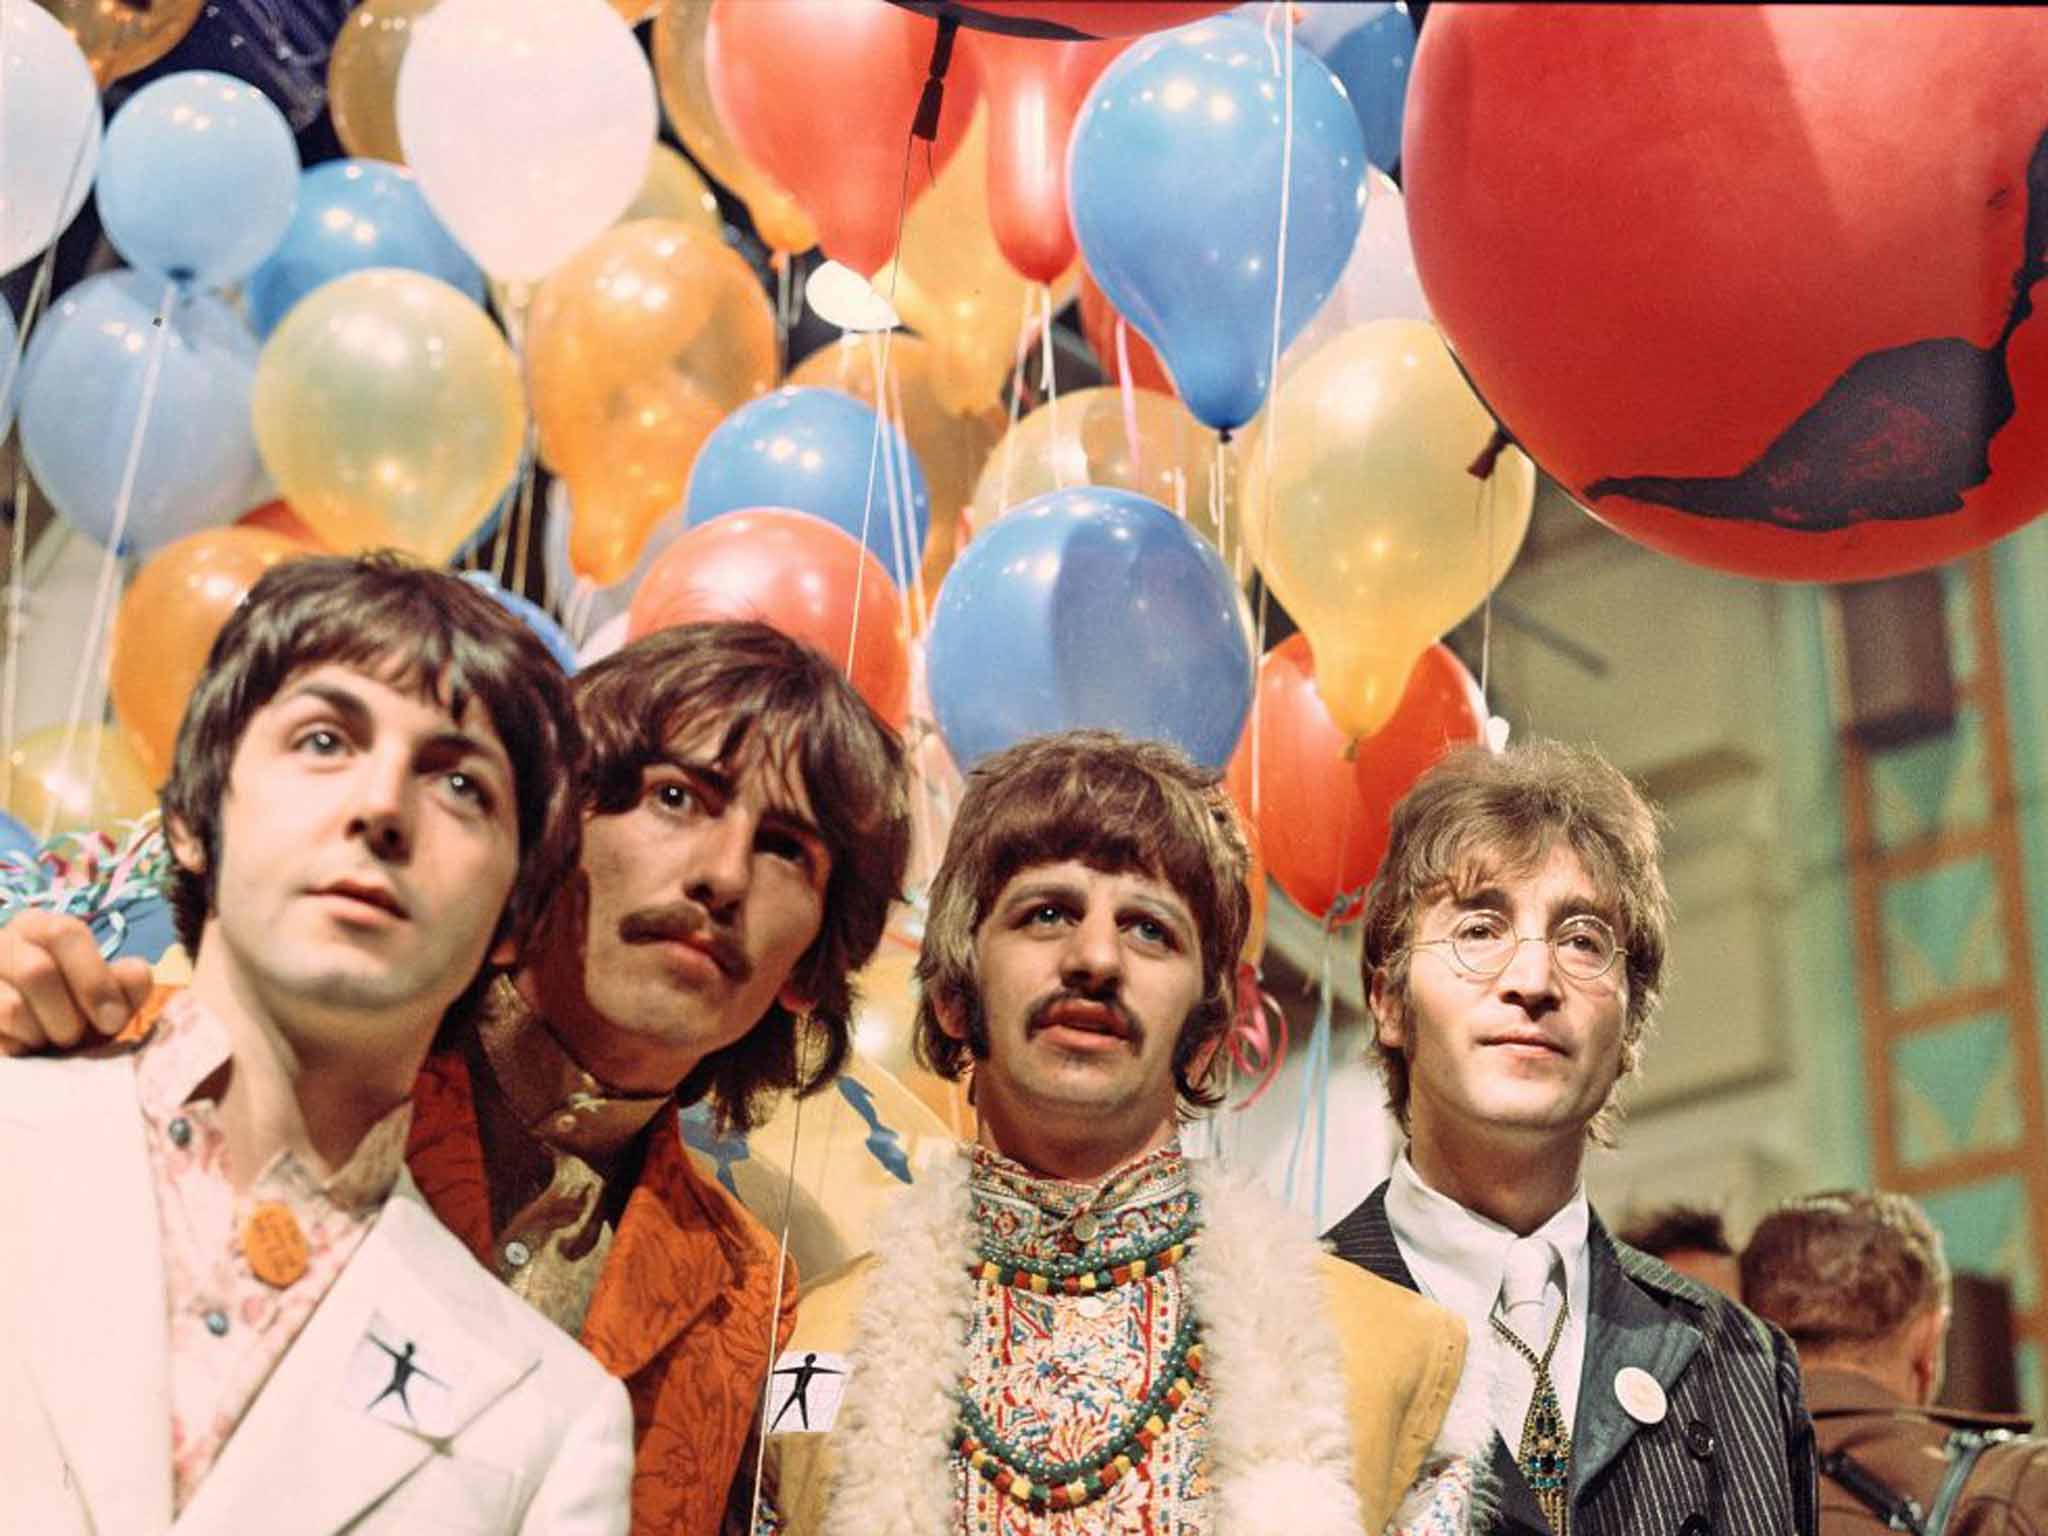 The Beatles streaming on Spotify, Apple Music and more from Christmas Eve, The Independent